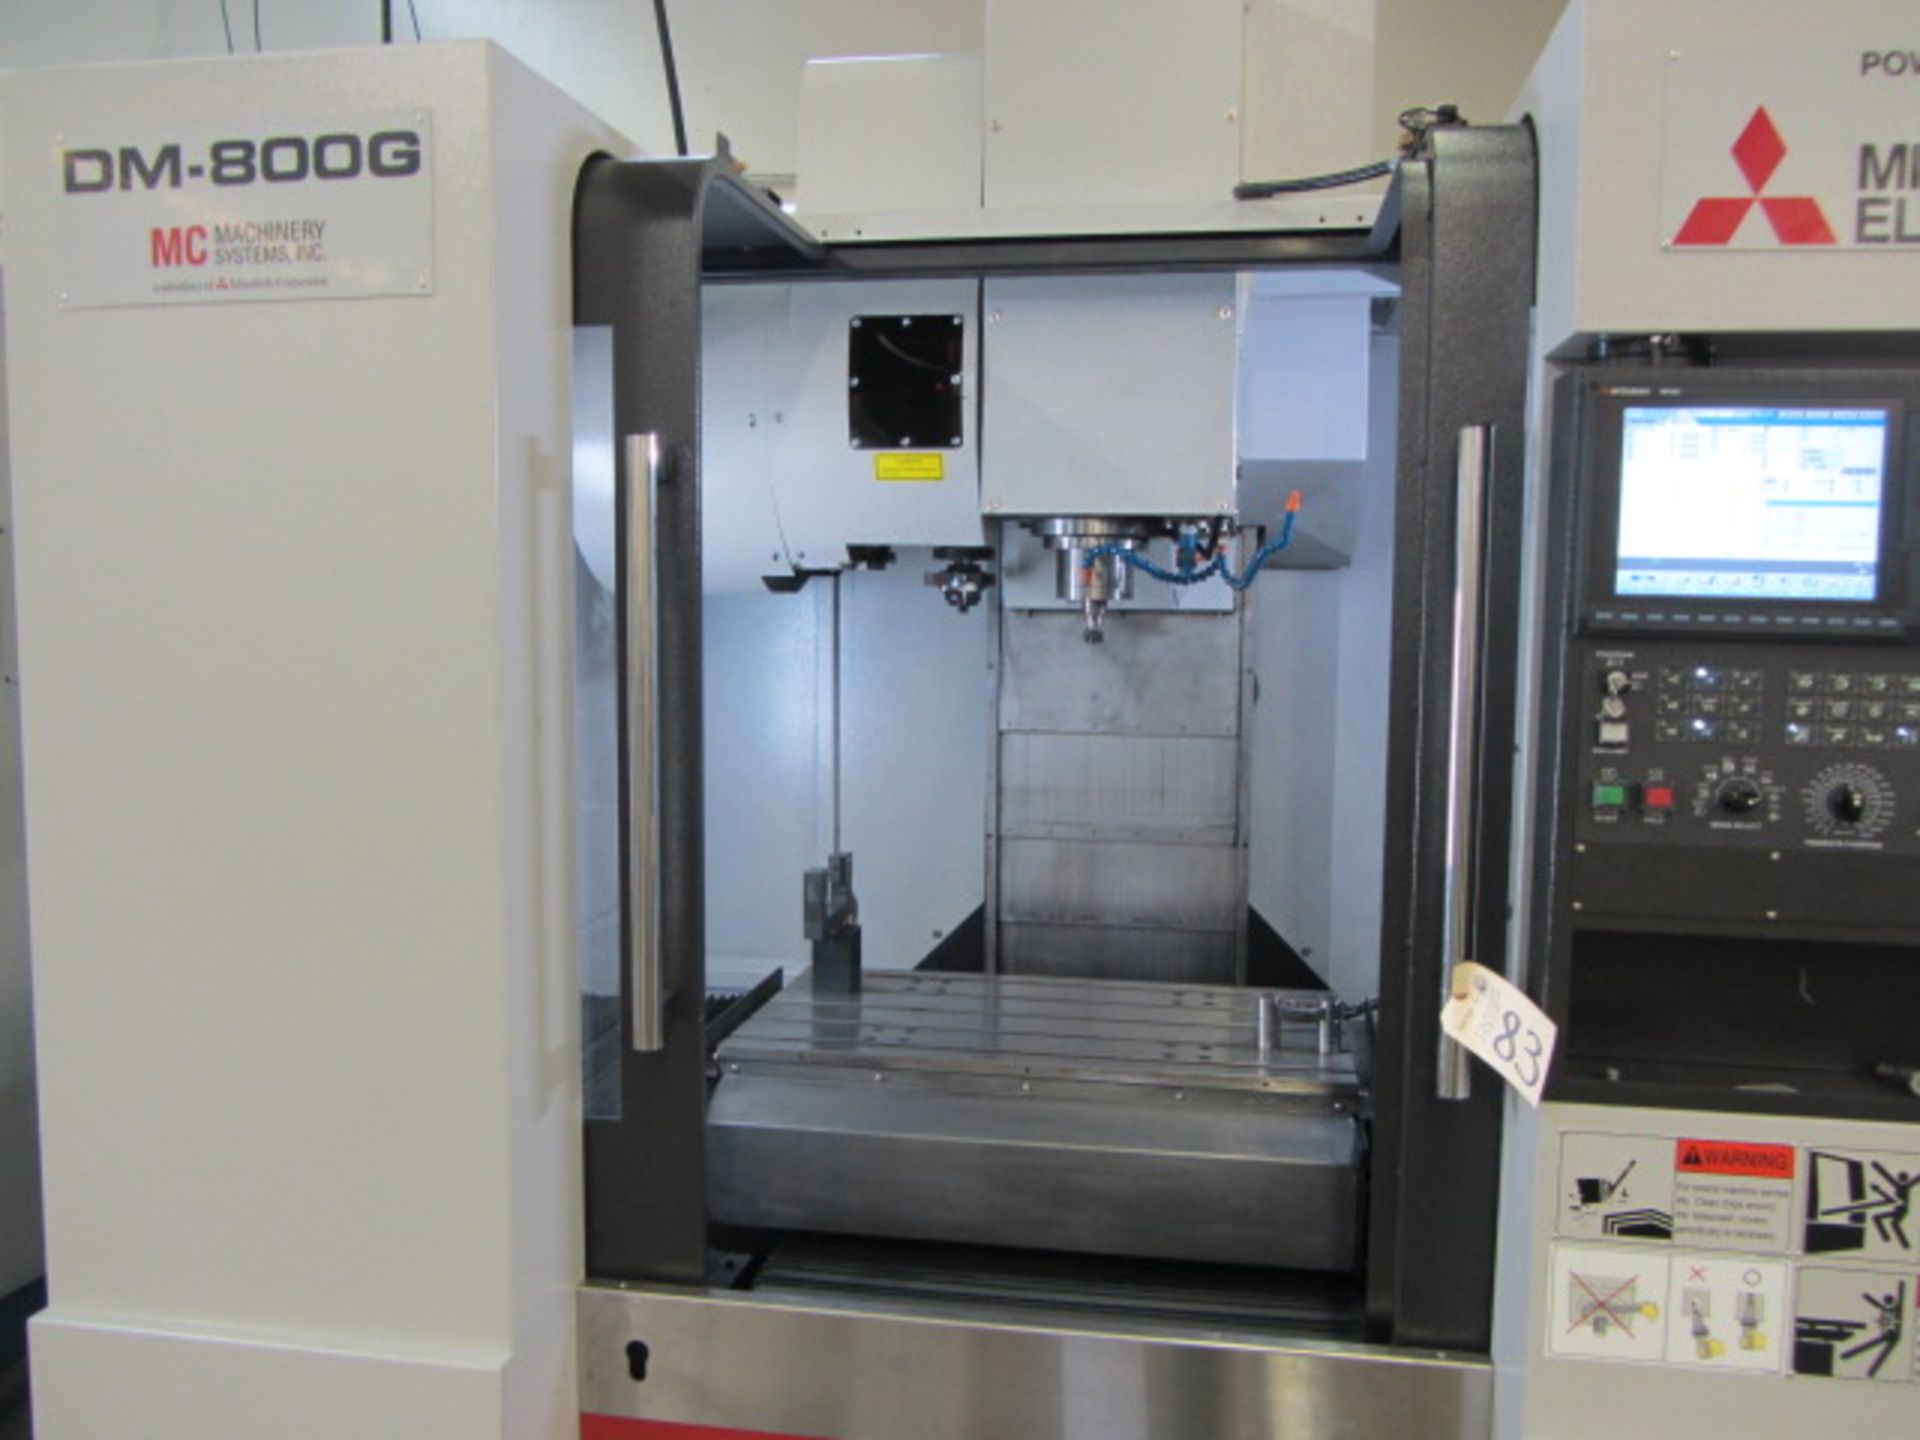 Mitsubishi Model DM-800G High Speed CNC Graphite Vertical Machining Center with 20'' x 36'' Table, - Image 5 of 10